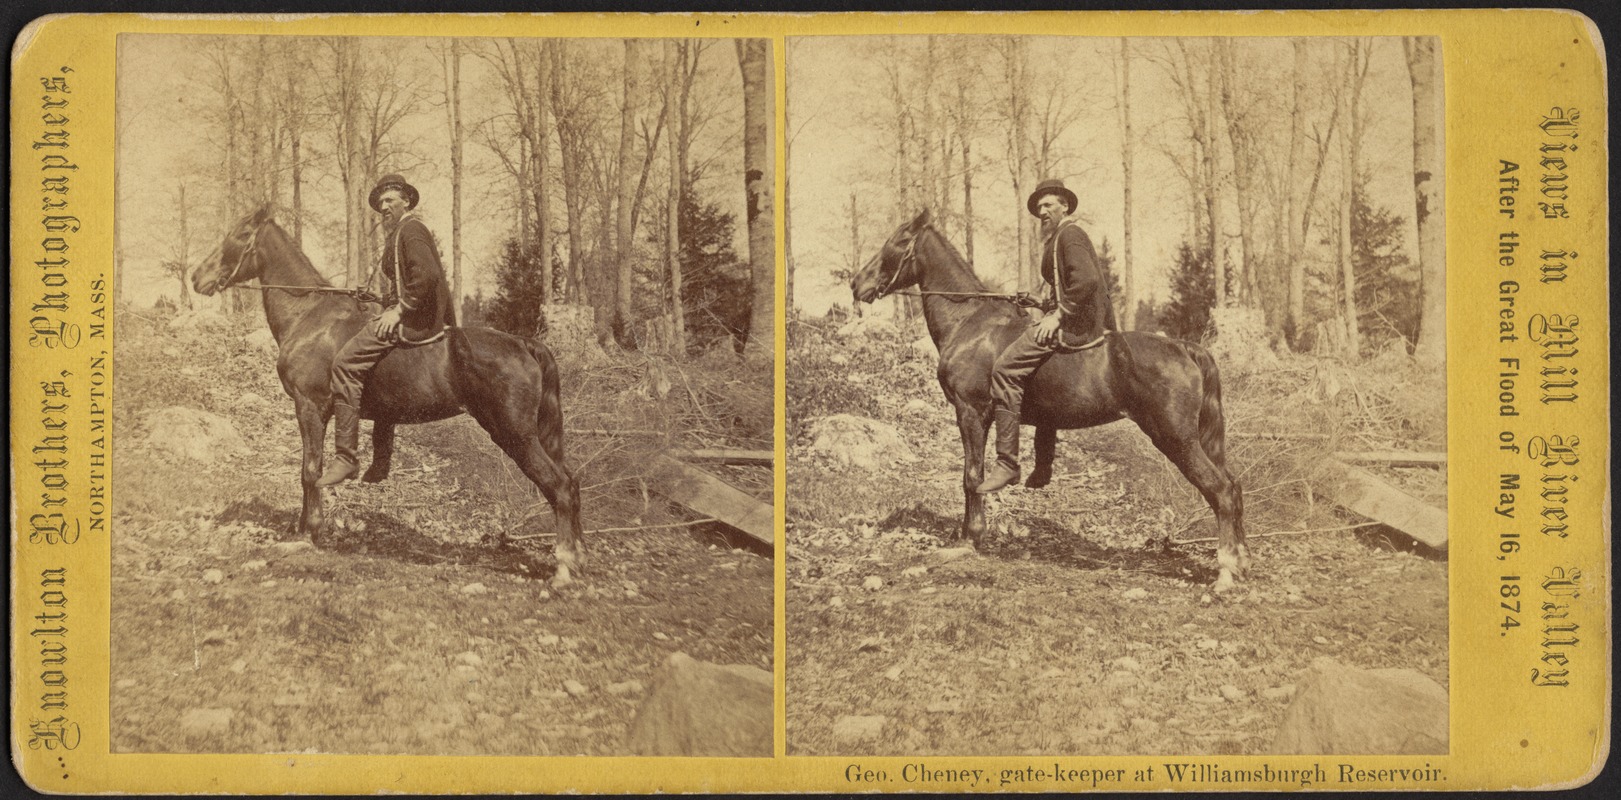 View of George Cheney, gate keeper of Reservoir, on his horse--Williamsburg